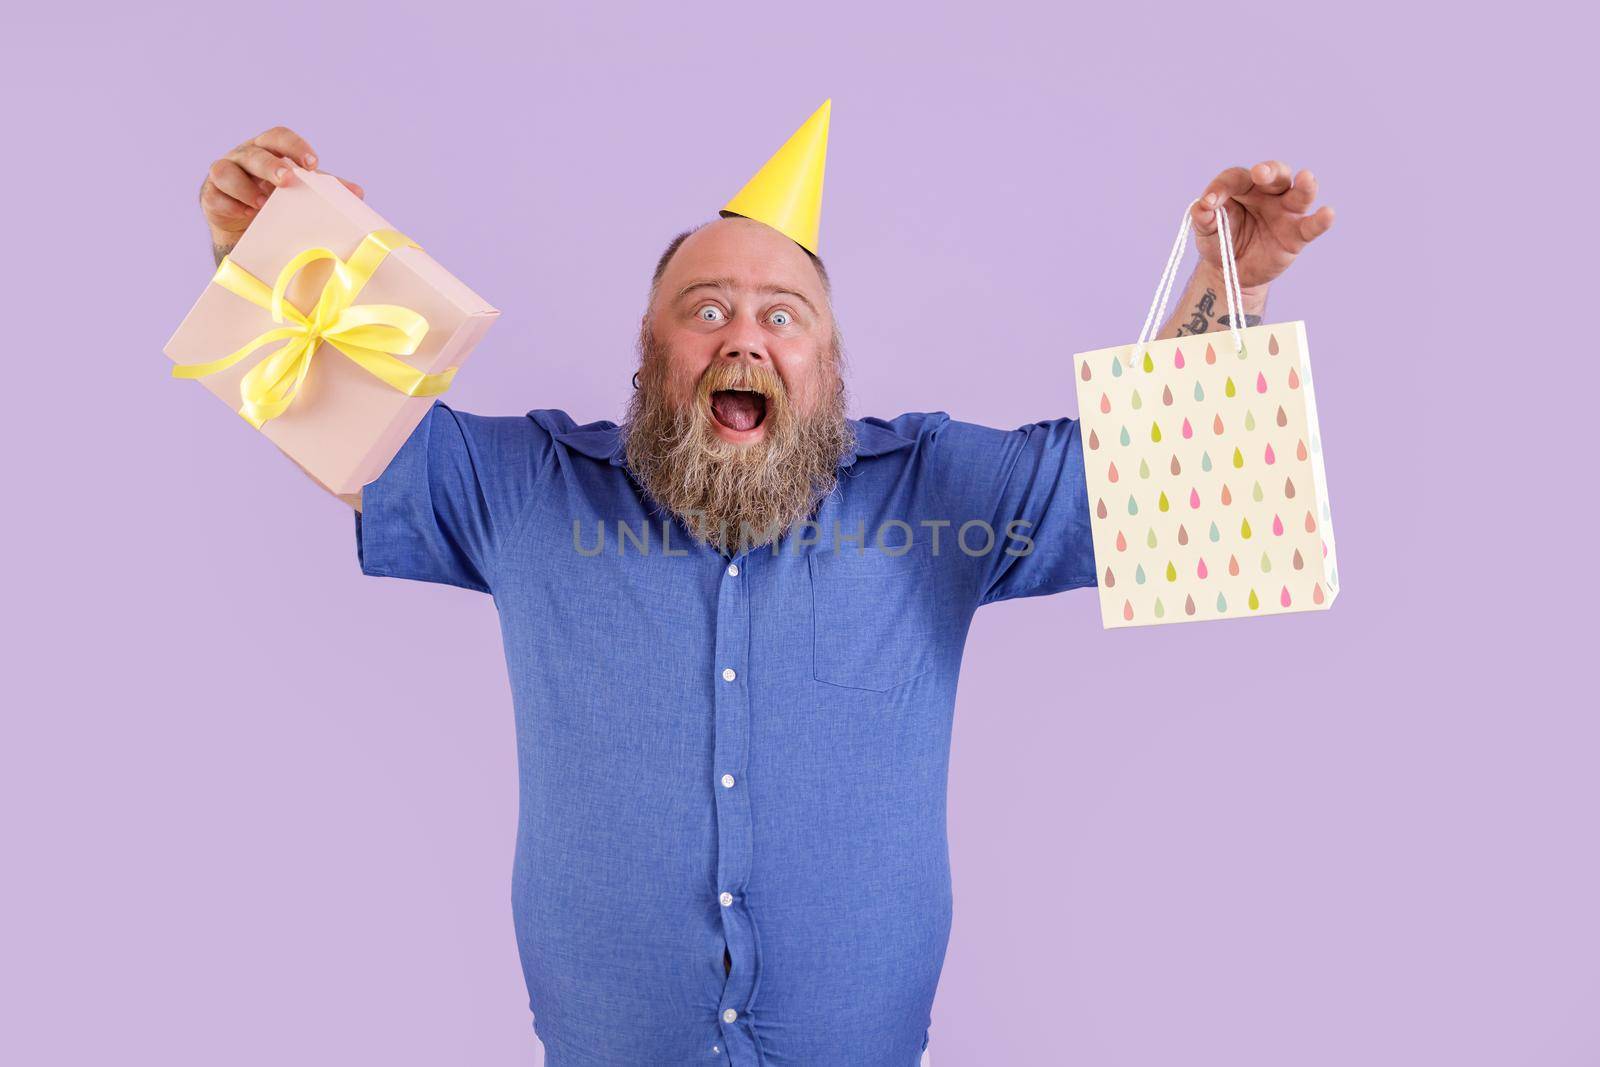 Joyful obese man in party hat shows gift box and paper bag on purple background by Yaroslav_astakhov